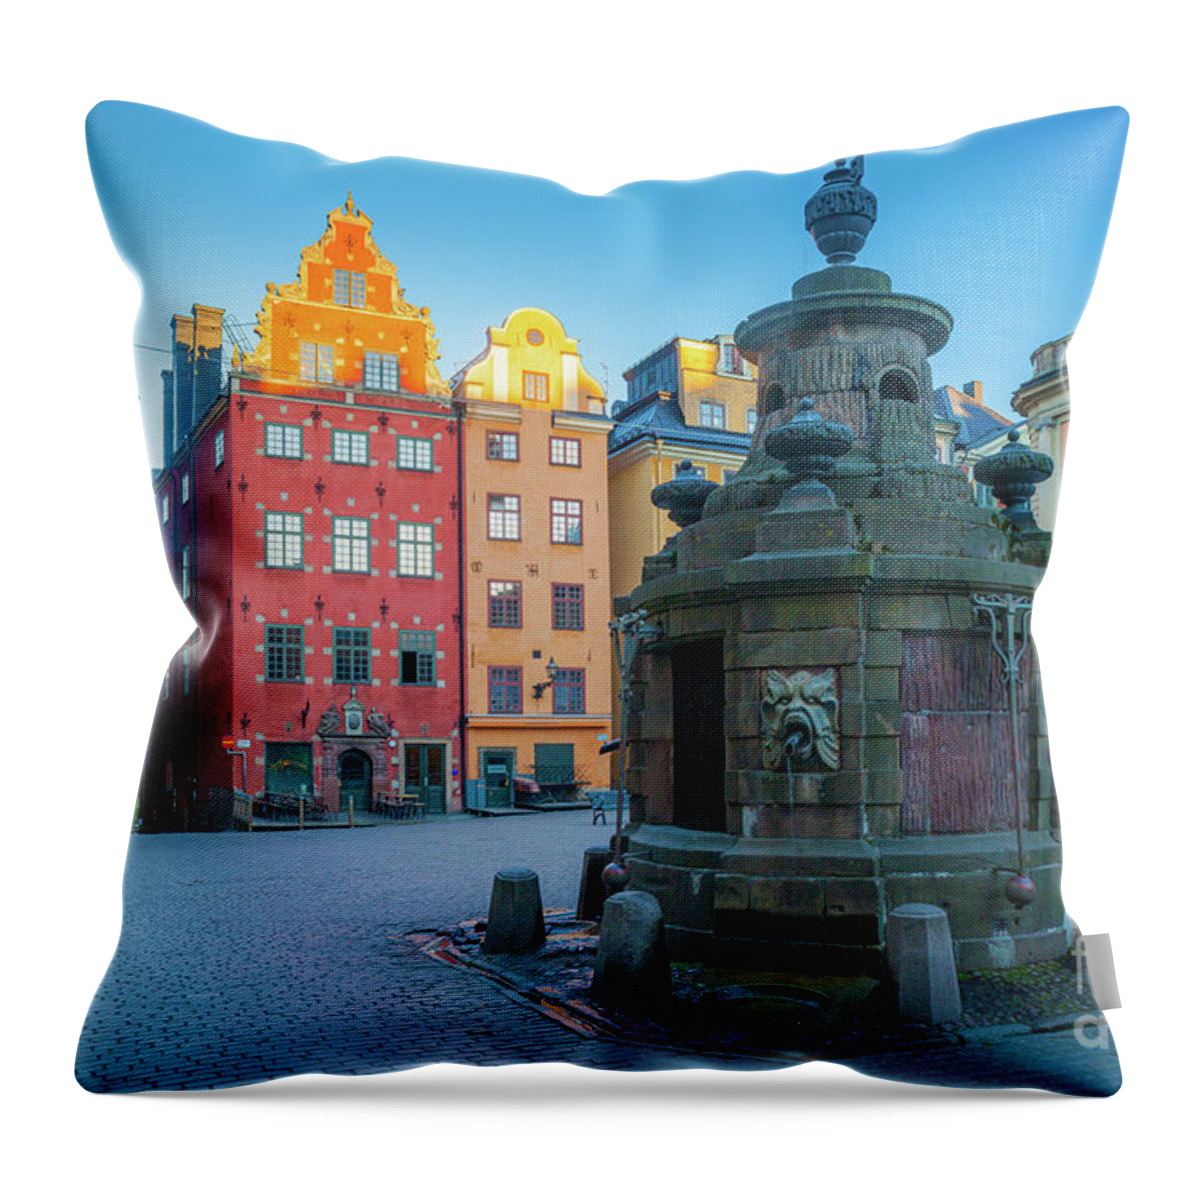 Europe Throw Pillow featuring the photograph Stockholm Stortorget by Inge Johnsson